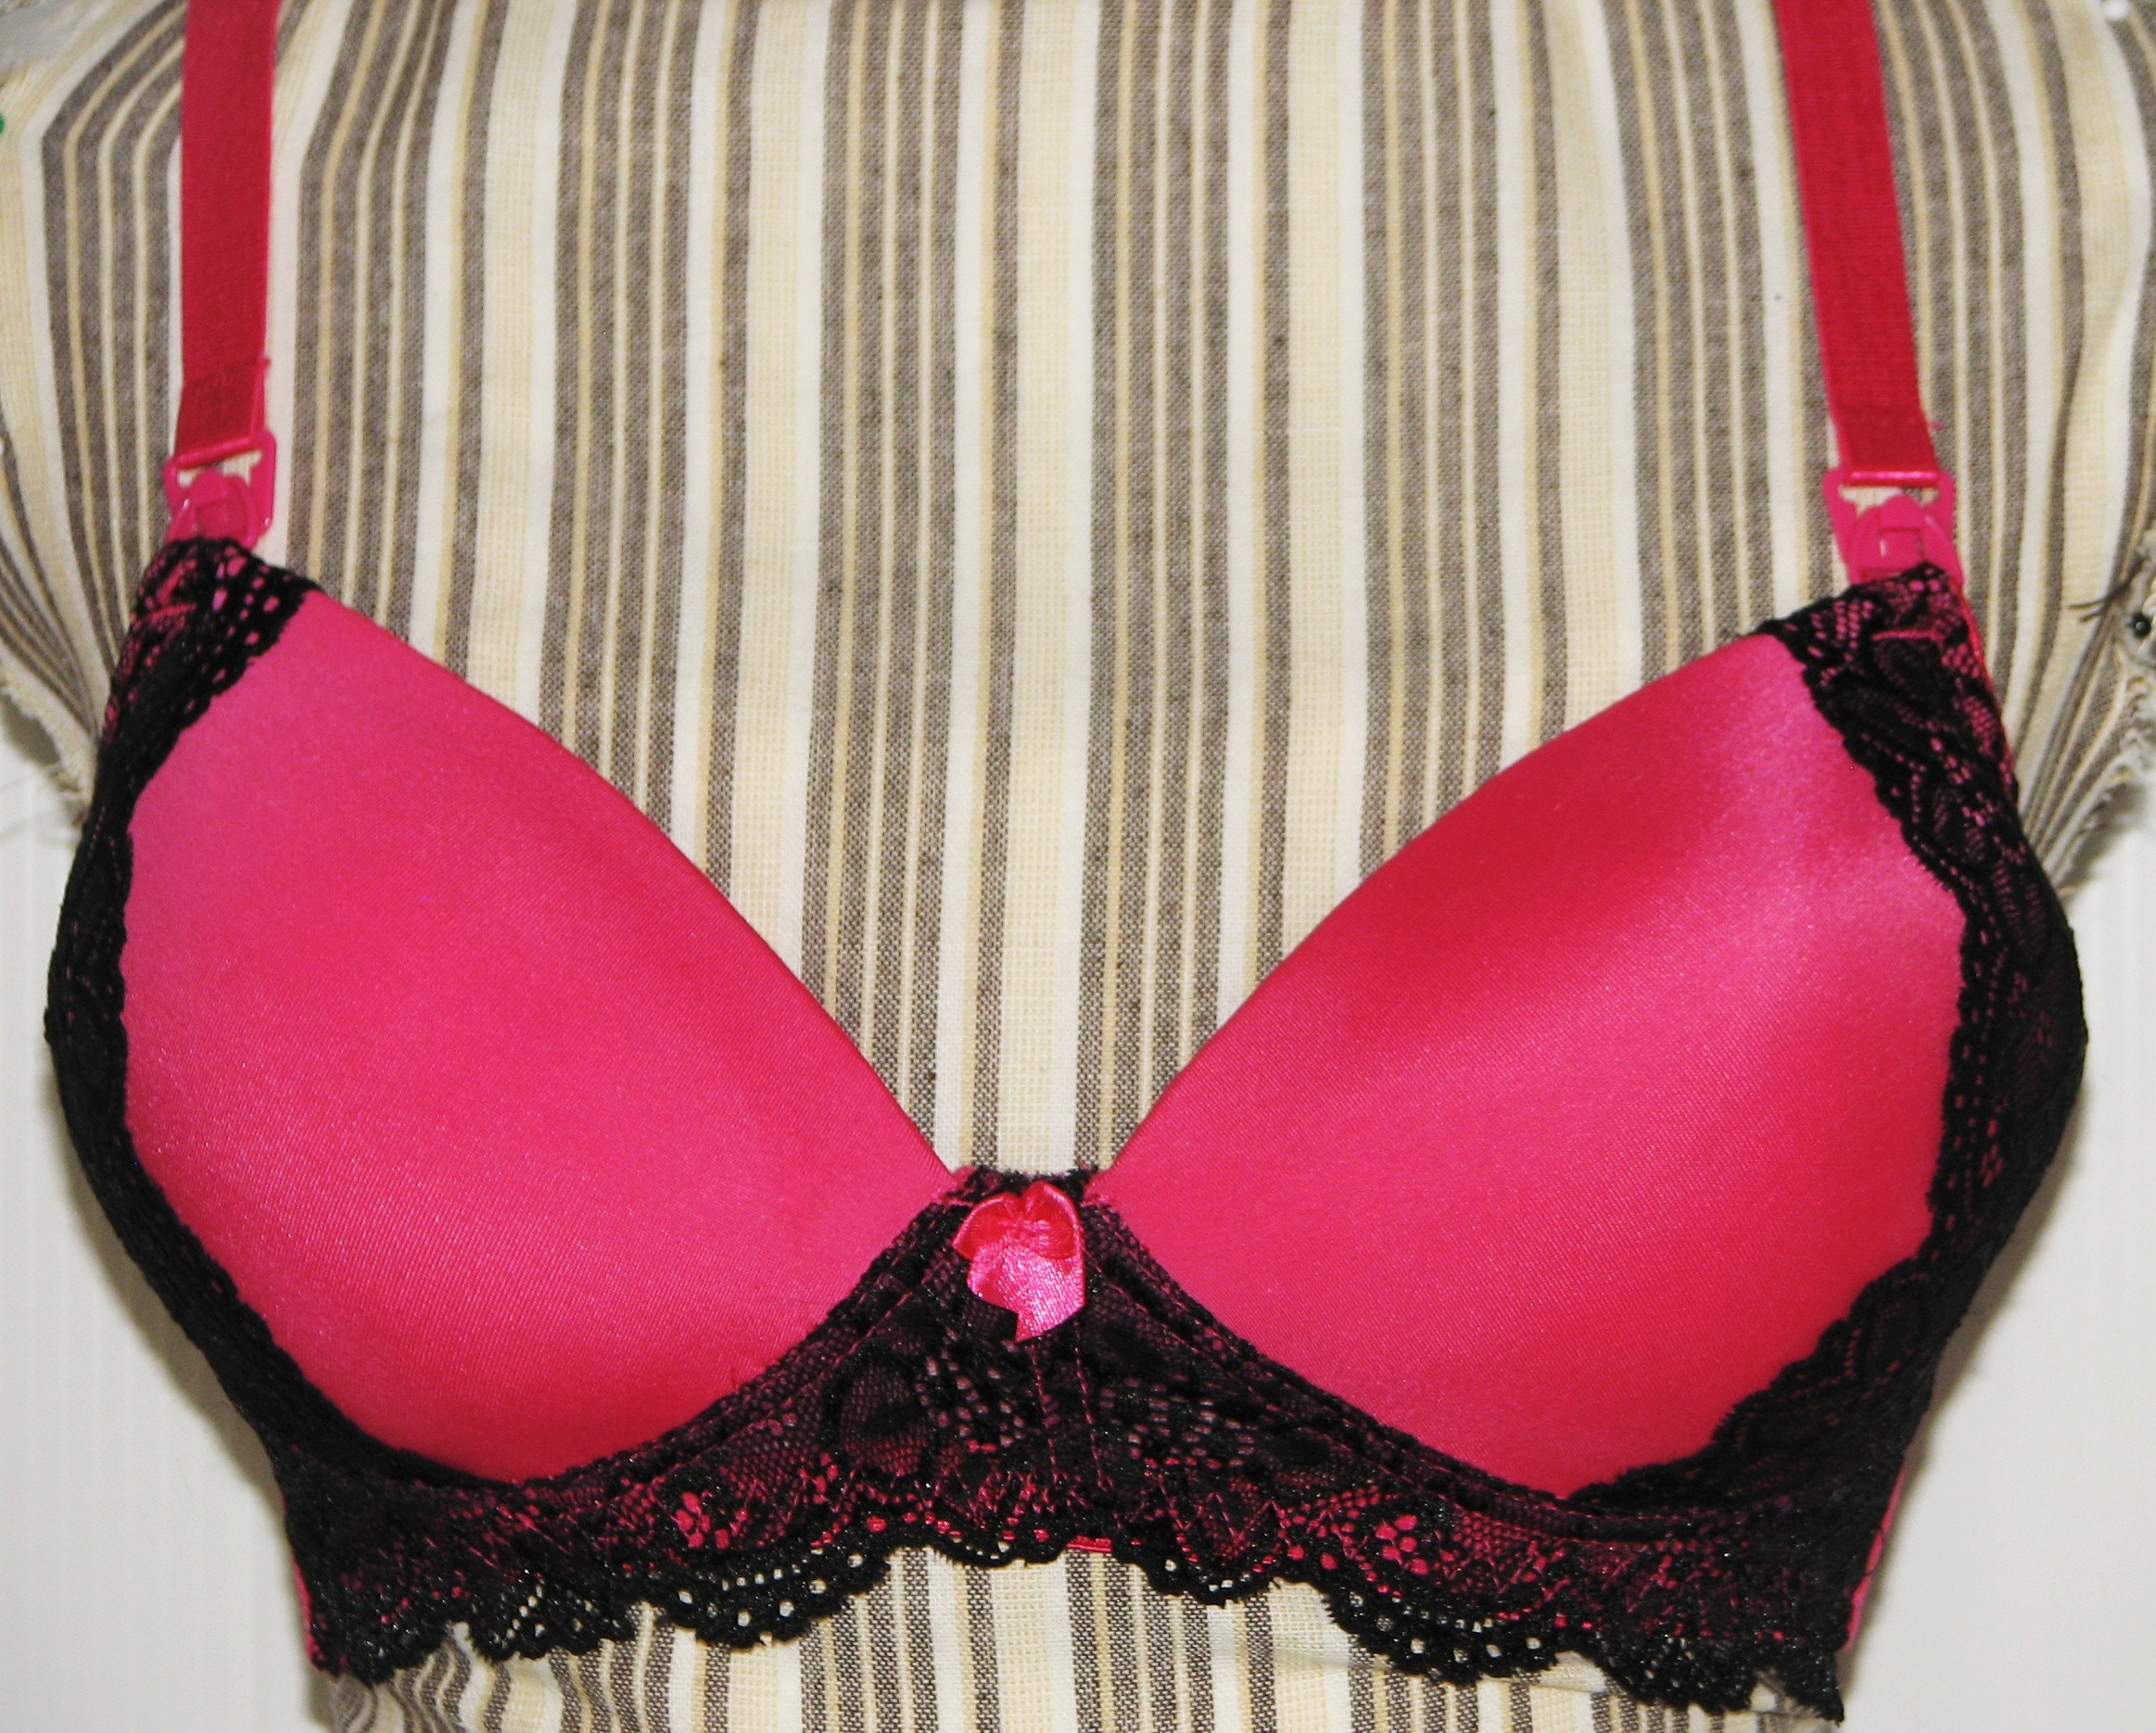 32DD Push-up Hot Pink Satin Padded Lace Trim Wired Bra 